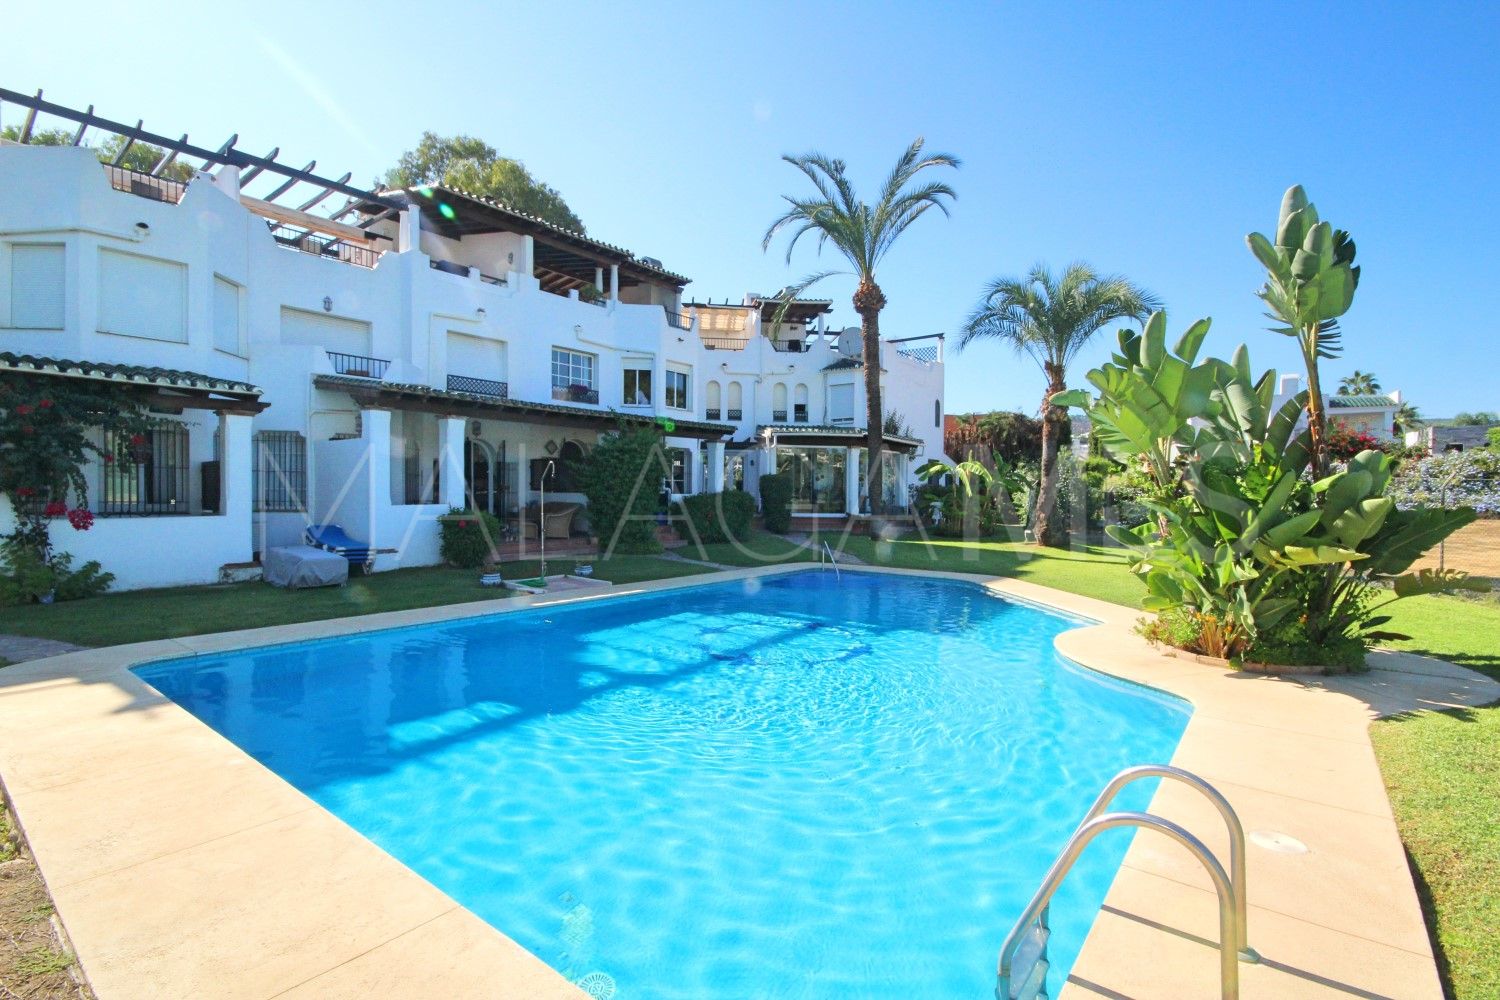 Town house with 3 bedrooms for sale in Soleuropa